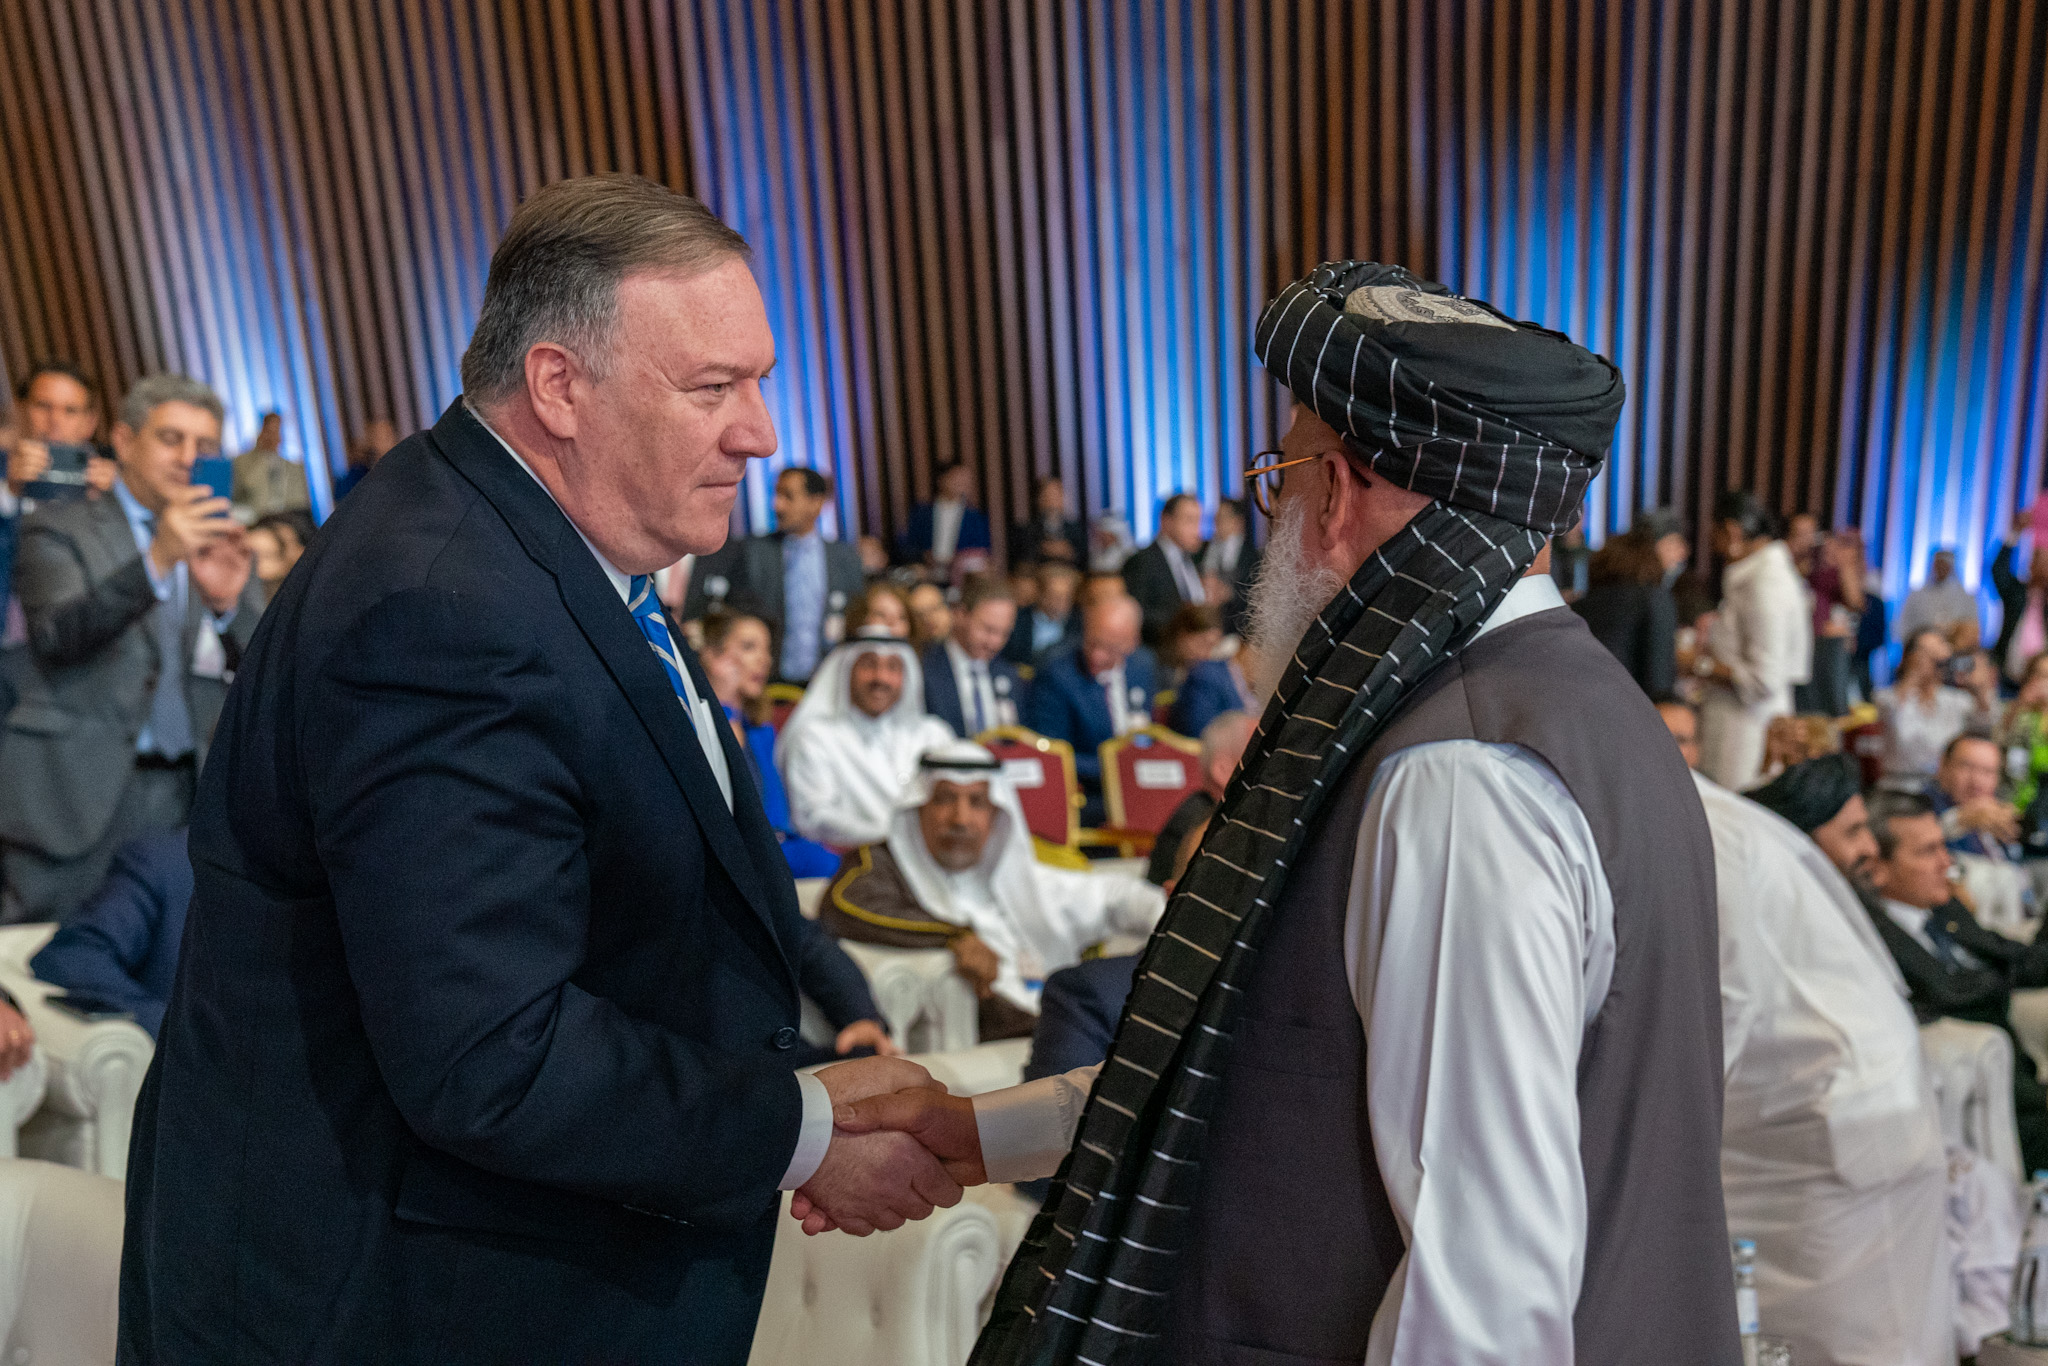 PHOTO: Secretary of State Mike Pompeo shakes hands with Taliban negotiator Sher Mohammad Abbas Stanikzai during a signing ceremony in Doha, Qatar, Feb. 29, 2020.